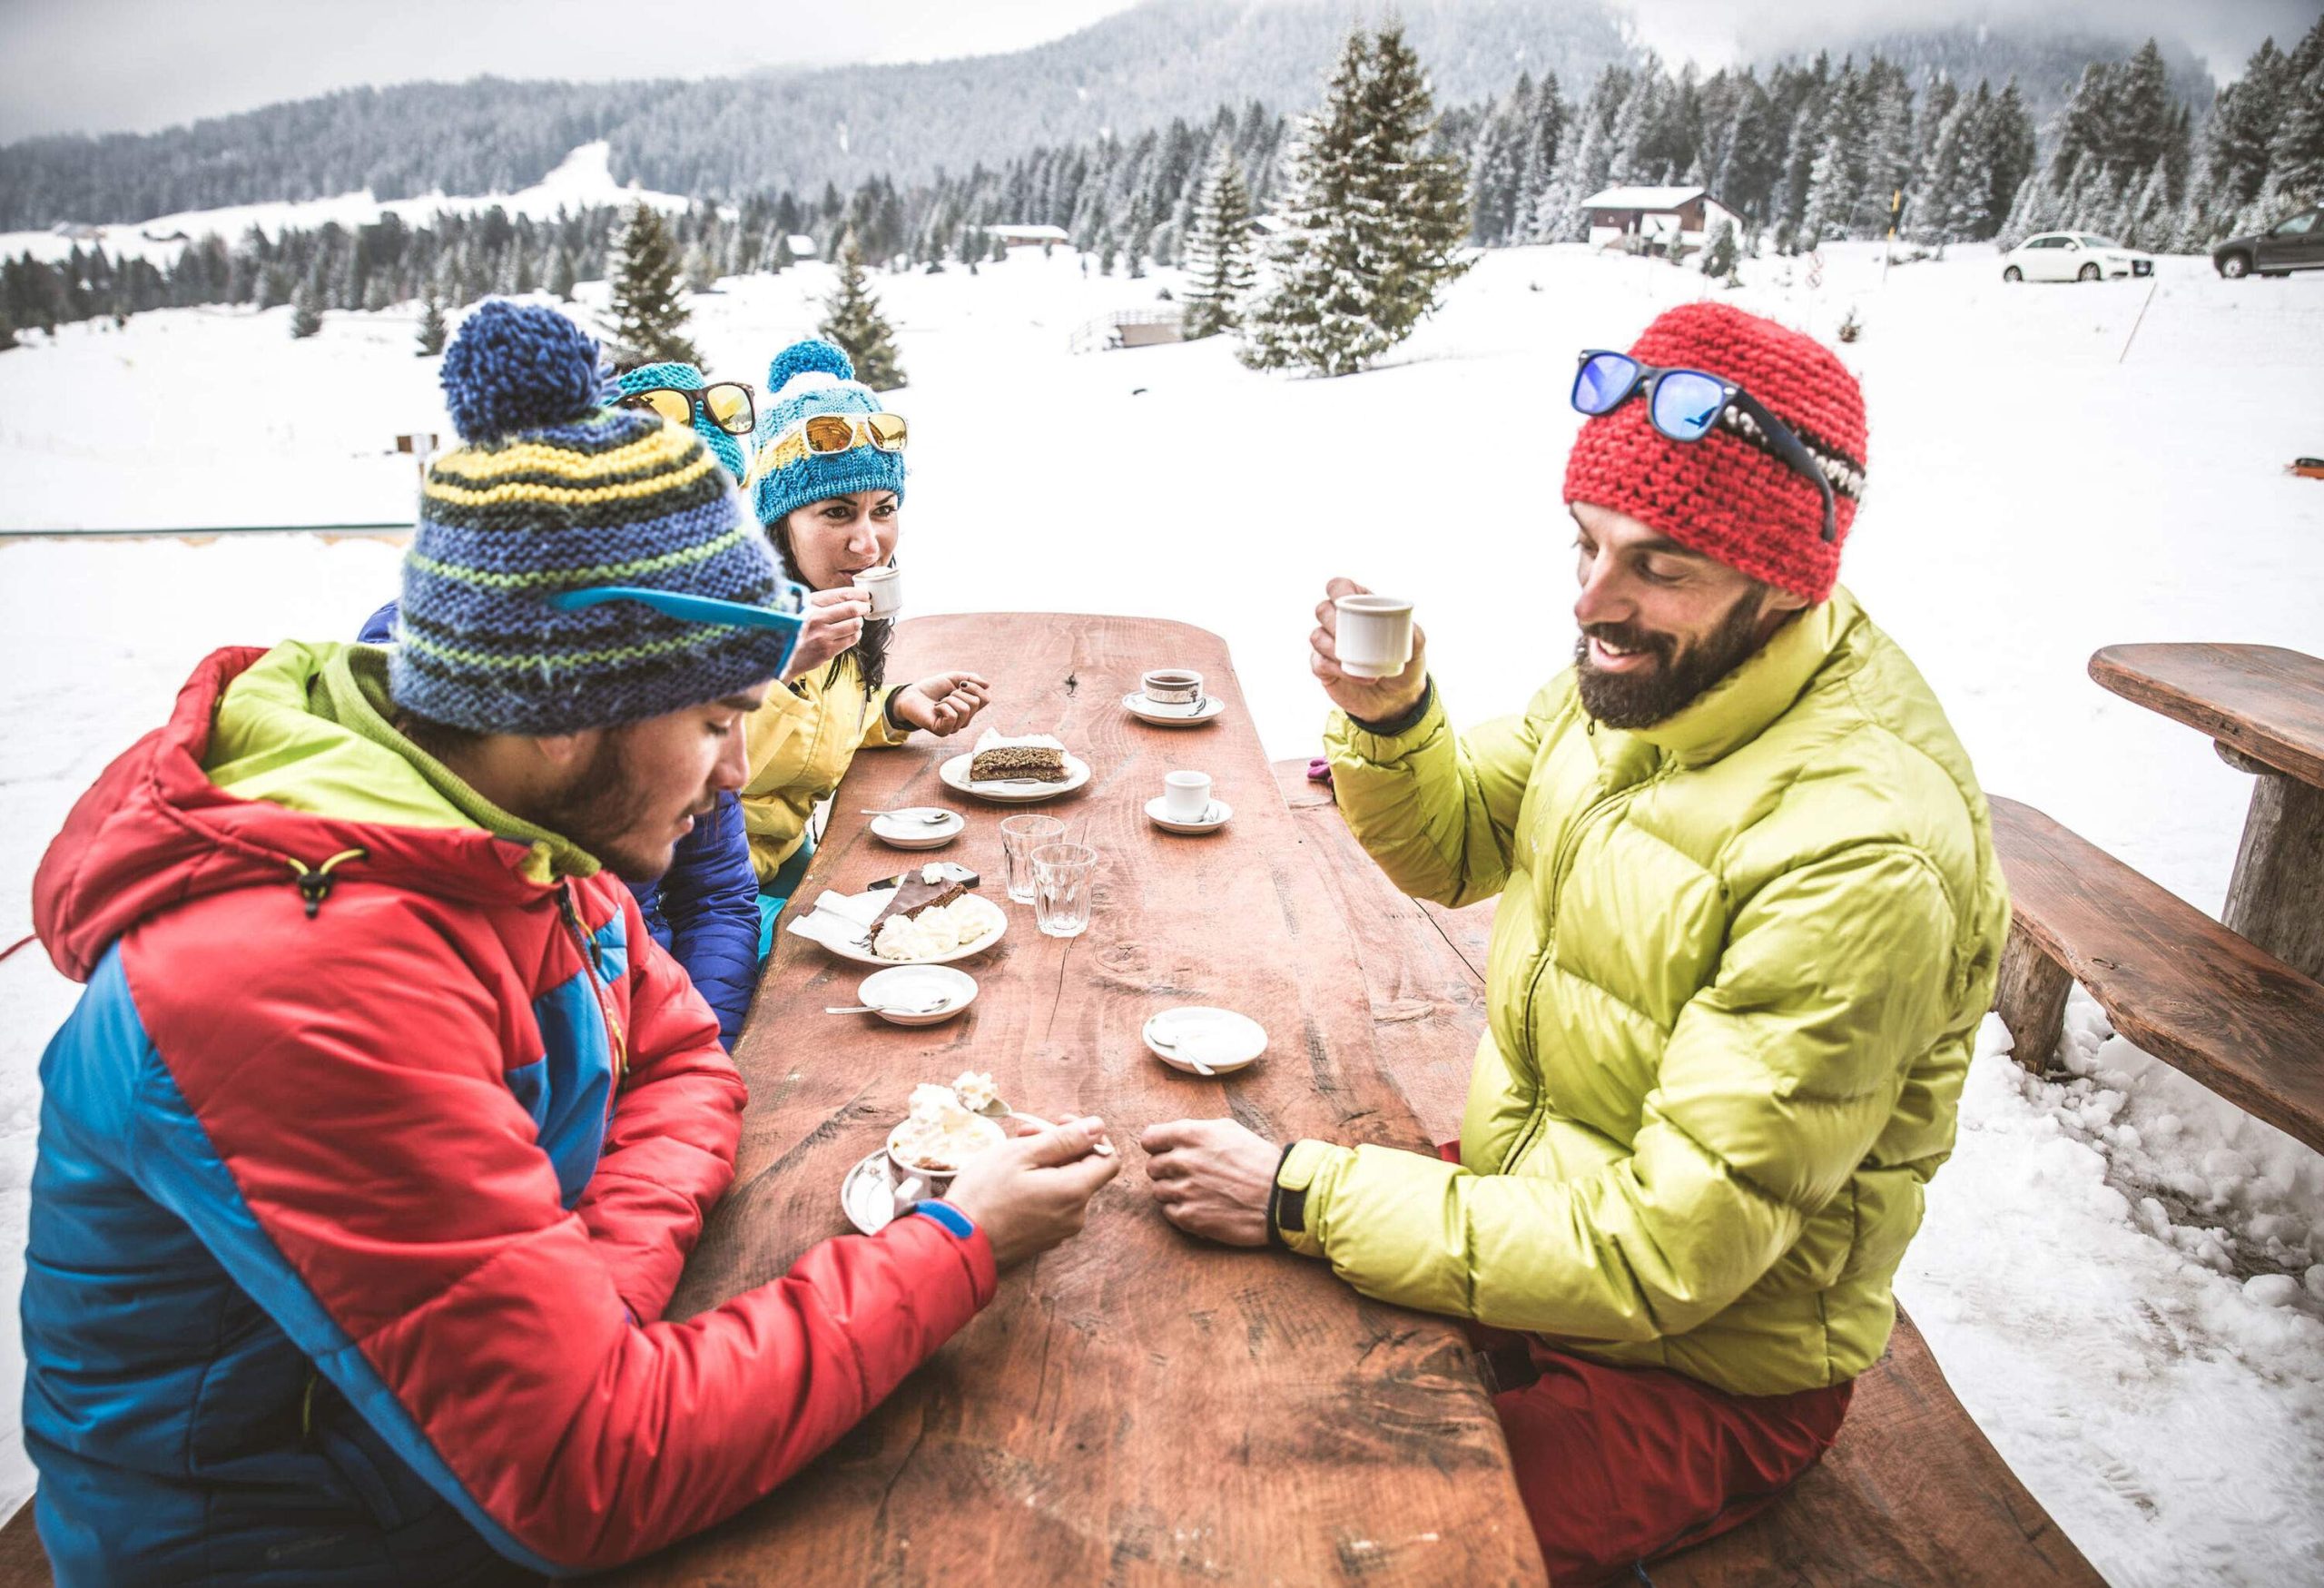 Three people dressed for the winter sitting on a wooden picnic table and enjoying good food.